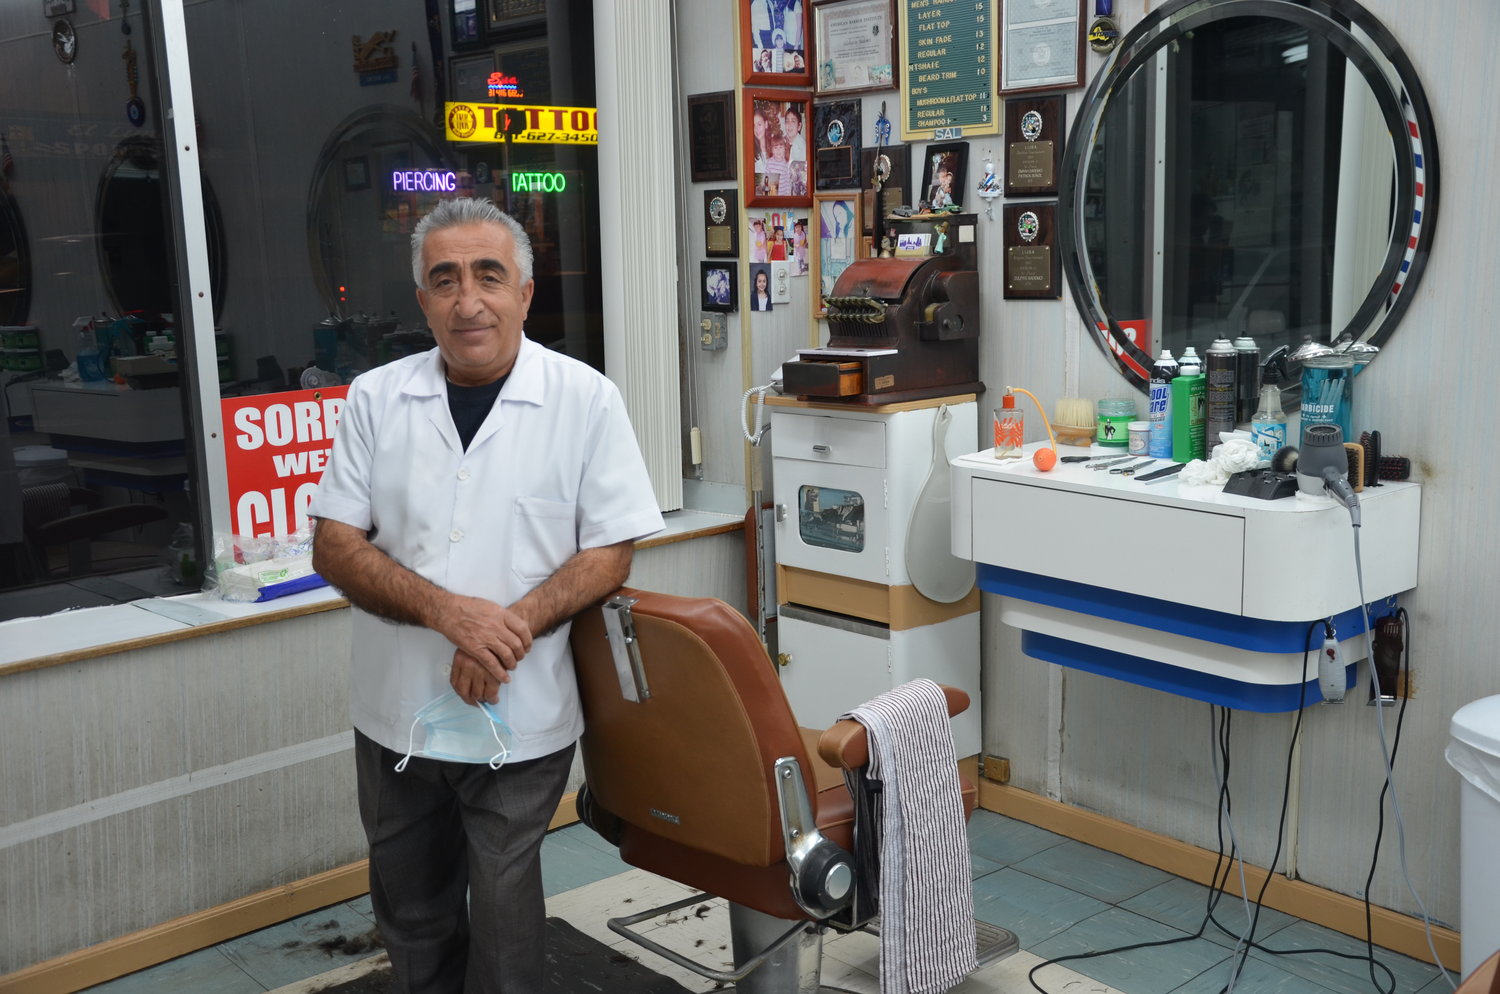 Celebrating 40 years in business at 295 East Main Street in East Patchogue last August, Sal’s Patchogue Barber Shop continues to thrive. Sal Bademci has run a one-man operation here in recent years, doing 25 to 30 cuts a day